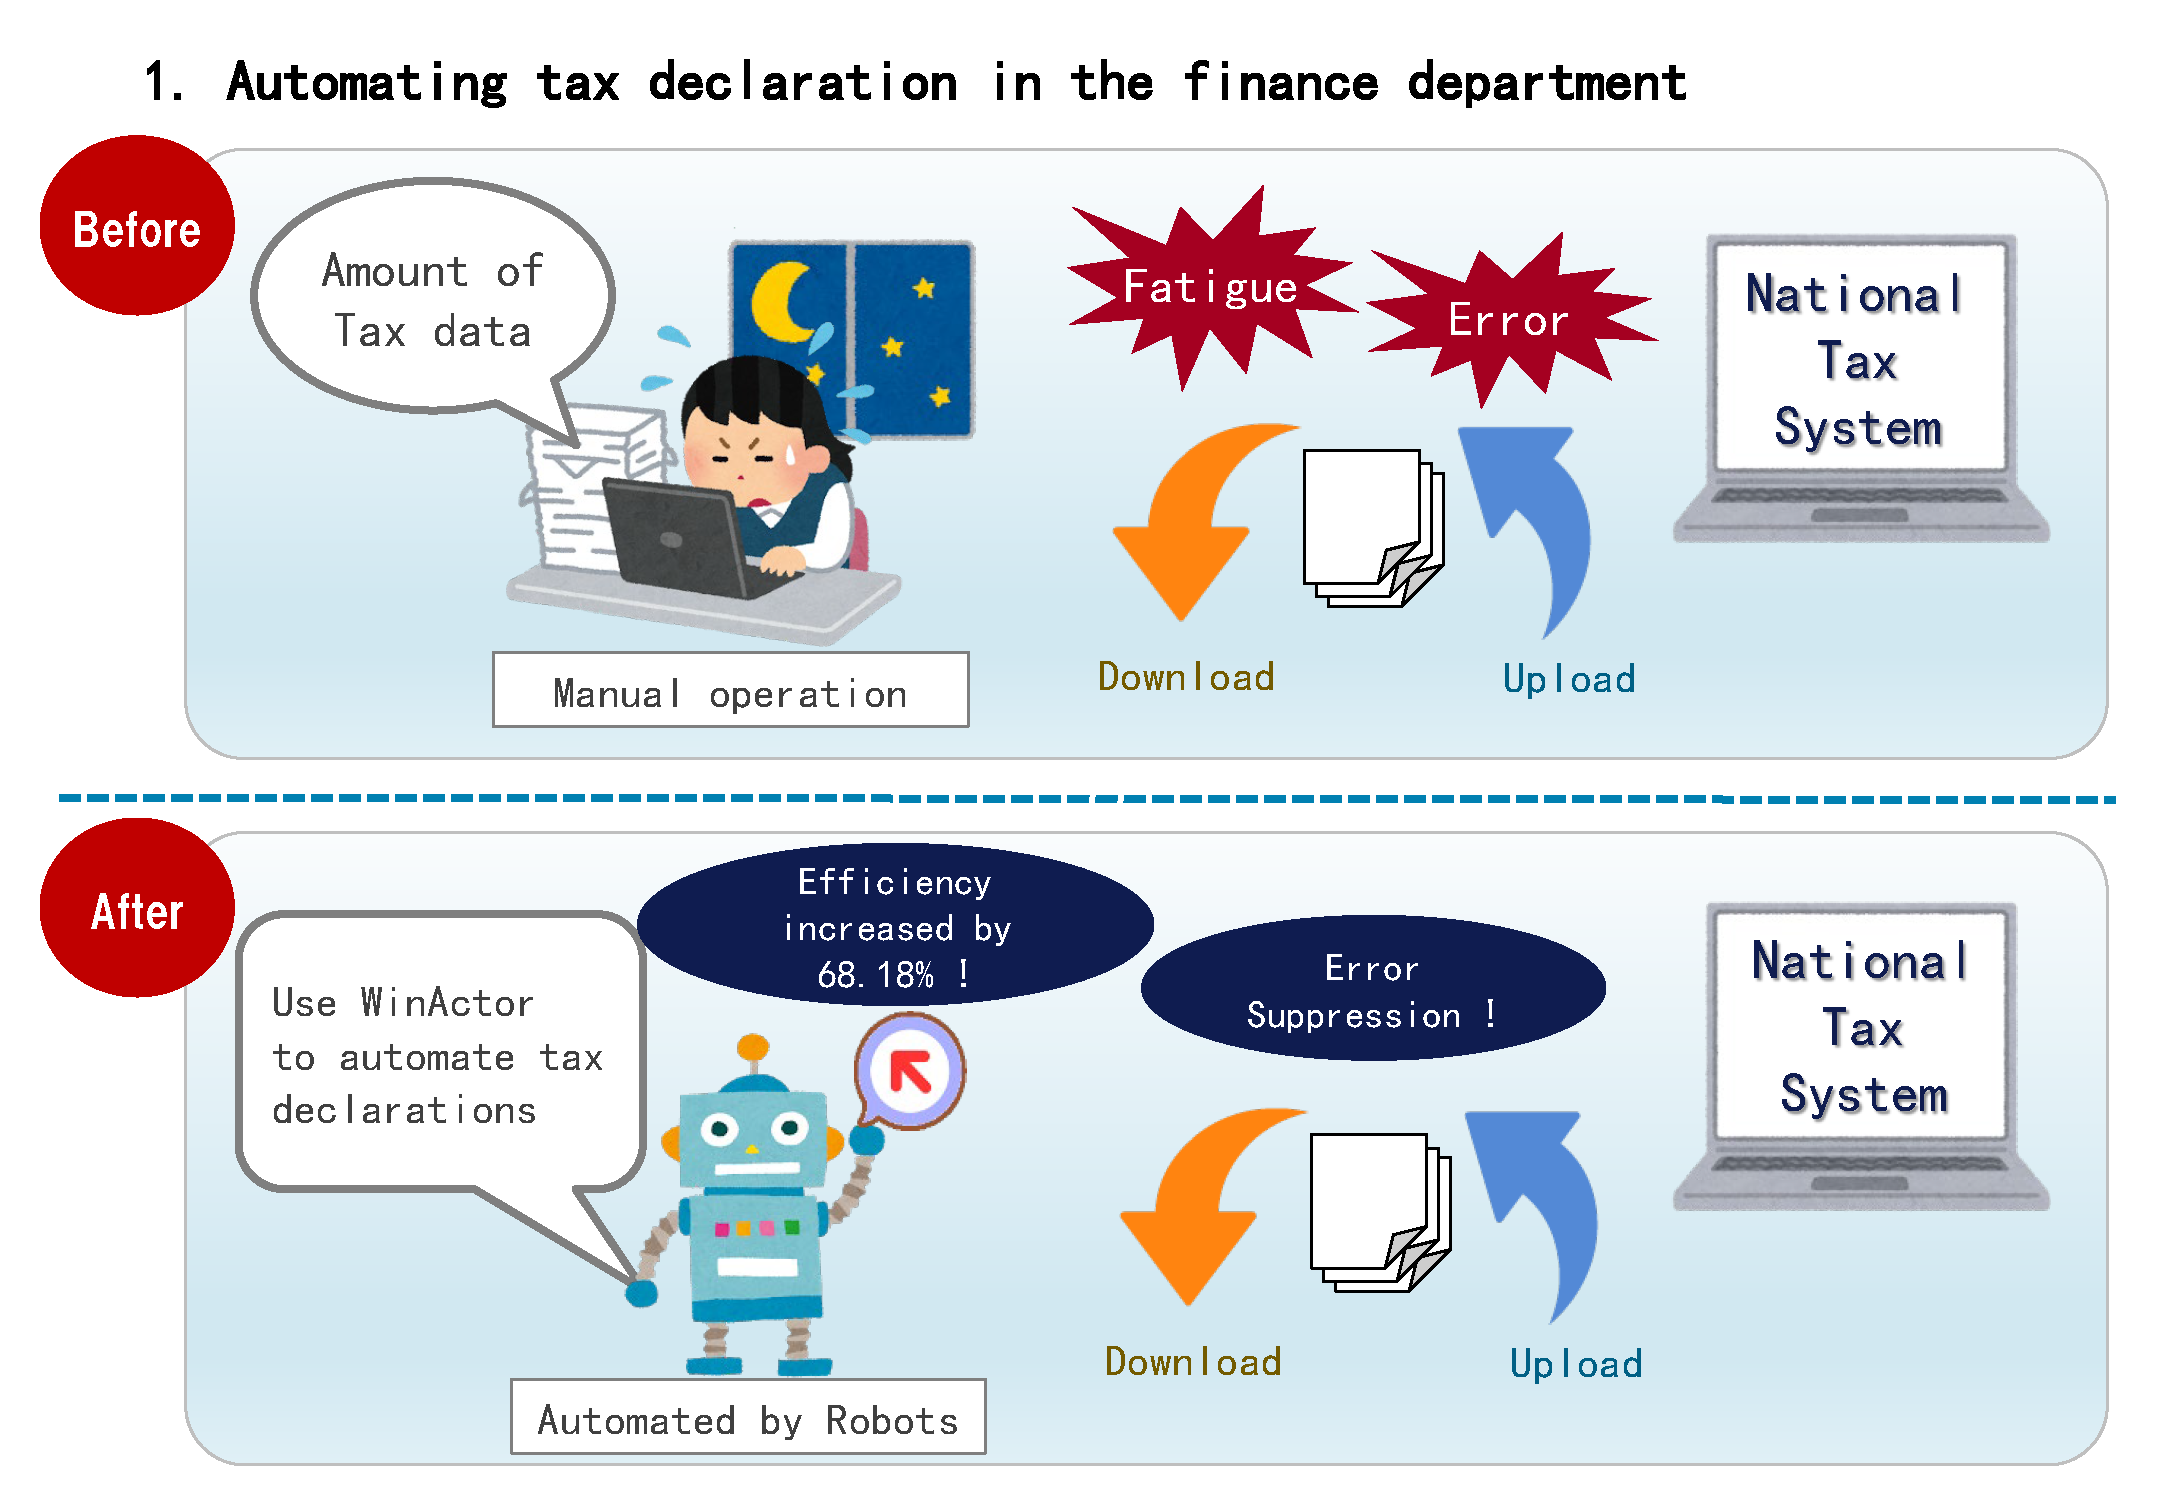 Automating tax declaration in the finance department